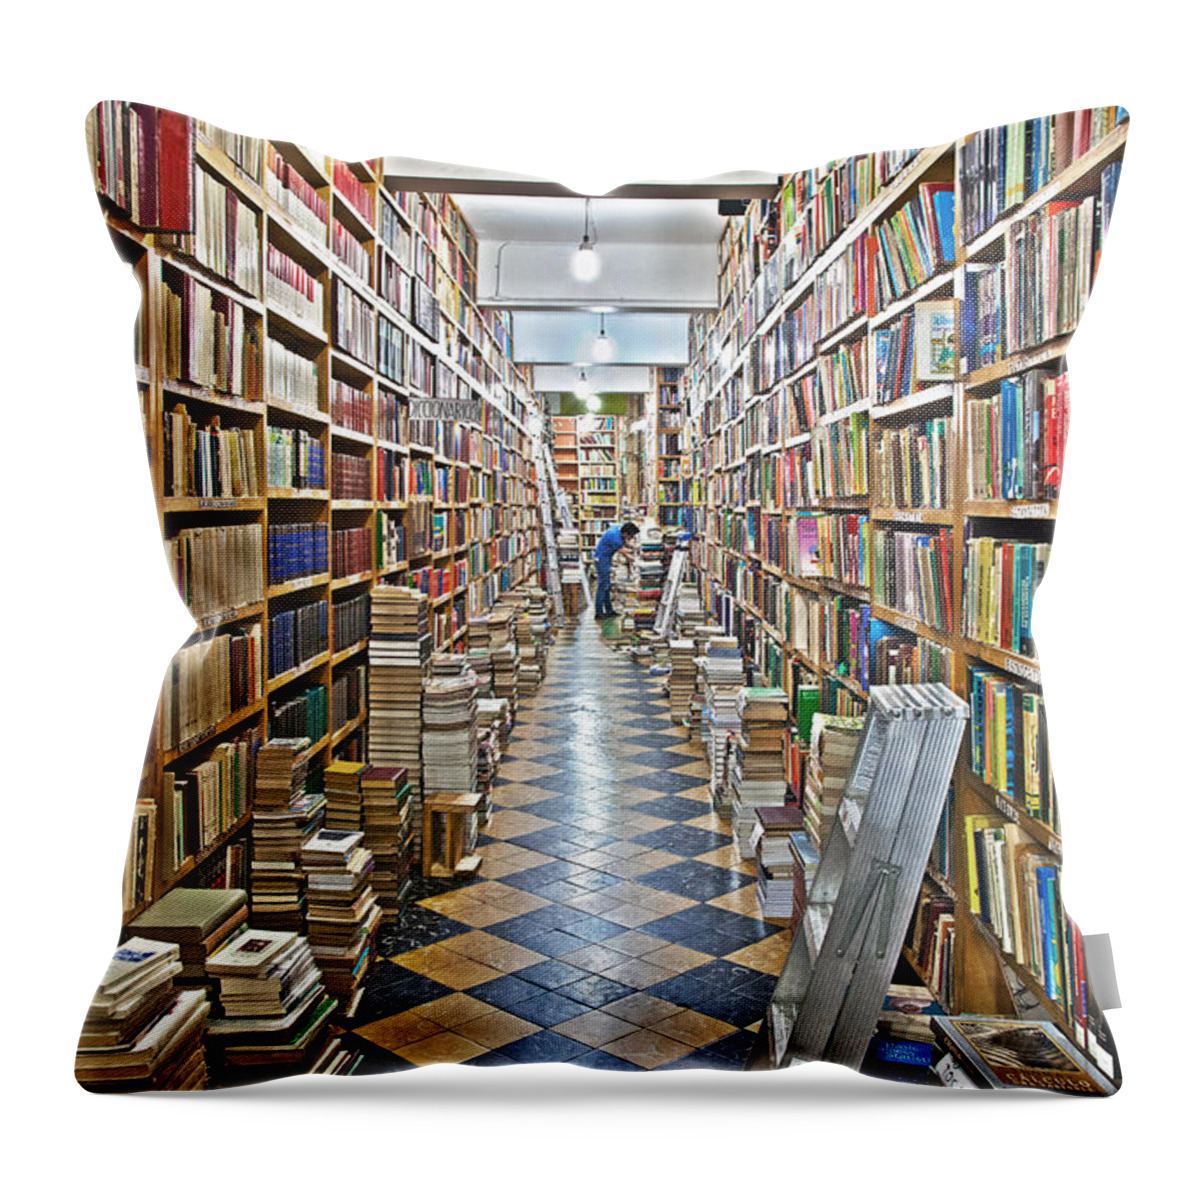 Books Throw Pillow featuring the photograph The Used Bookstore by John Bartosik